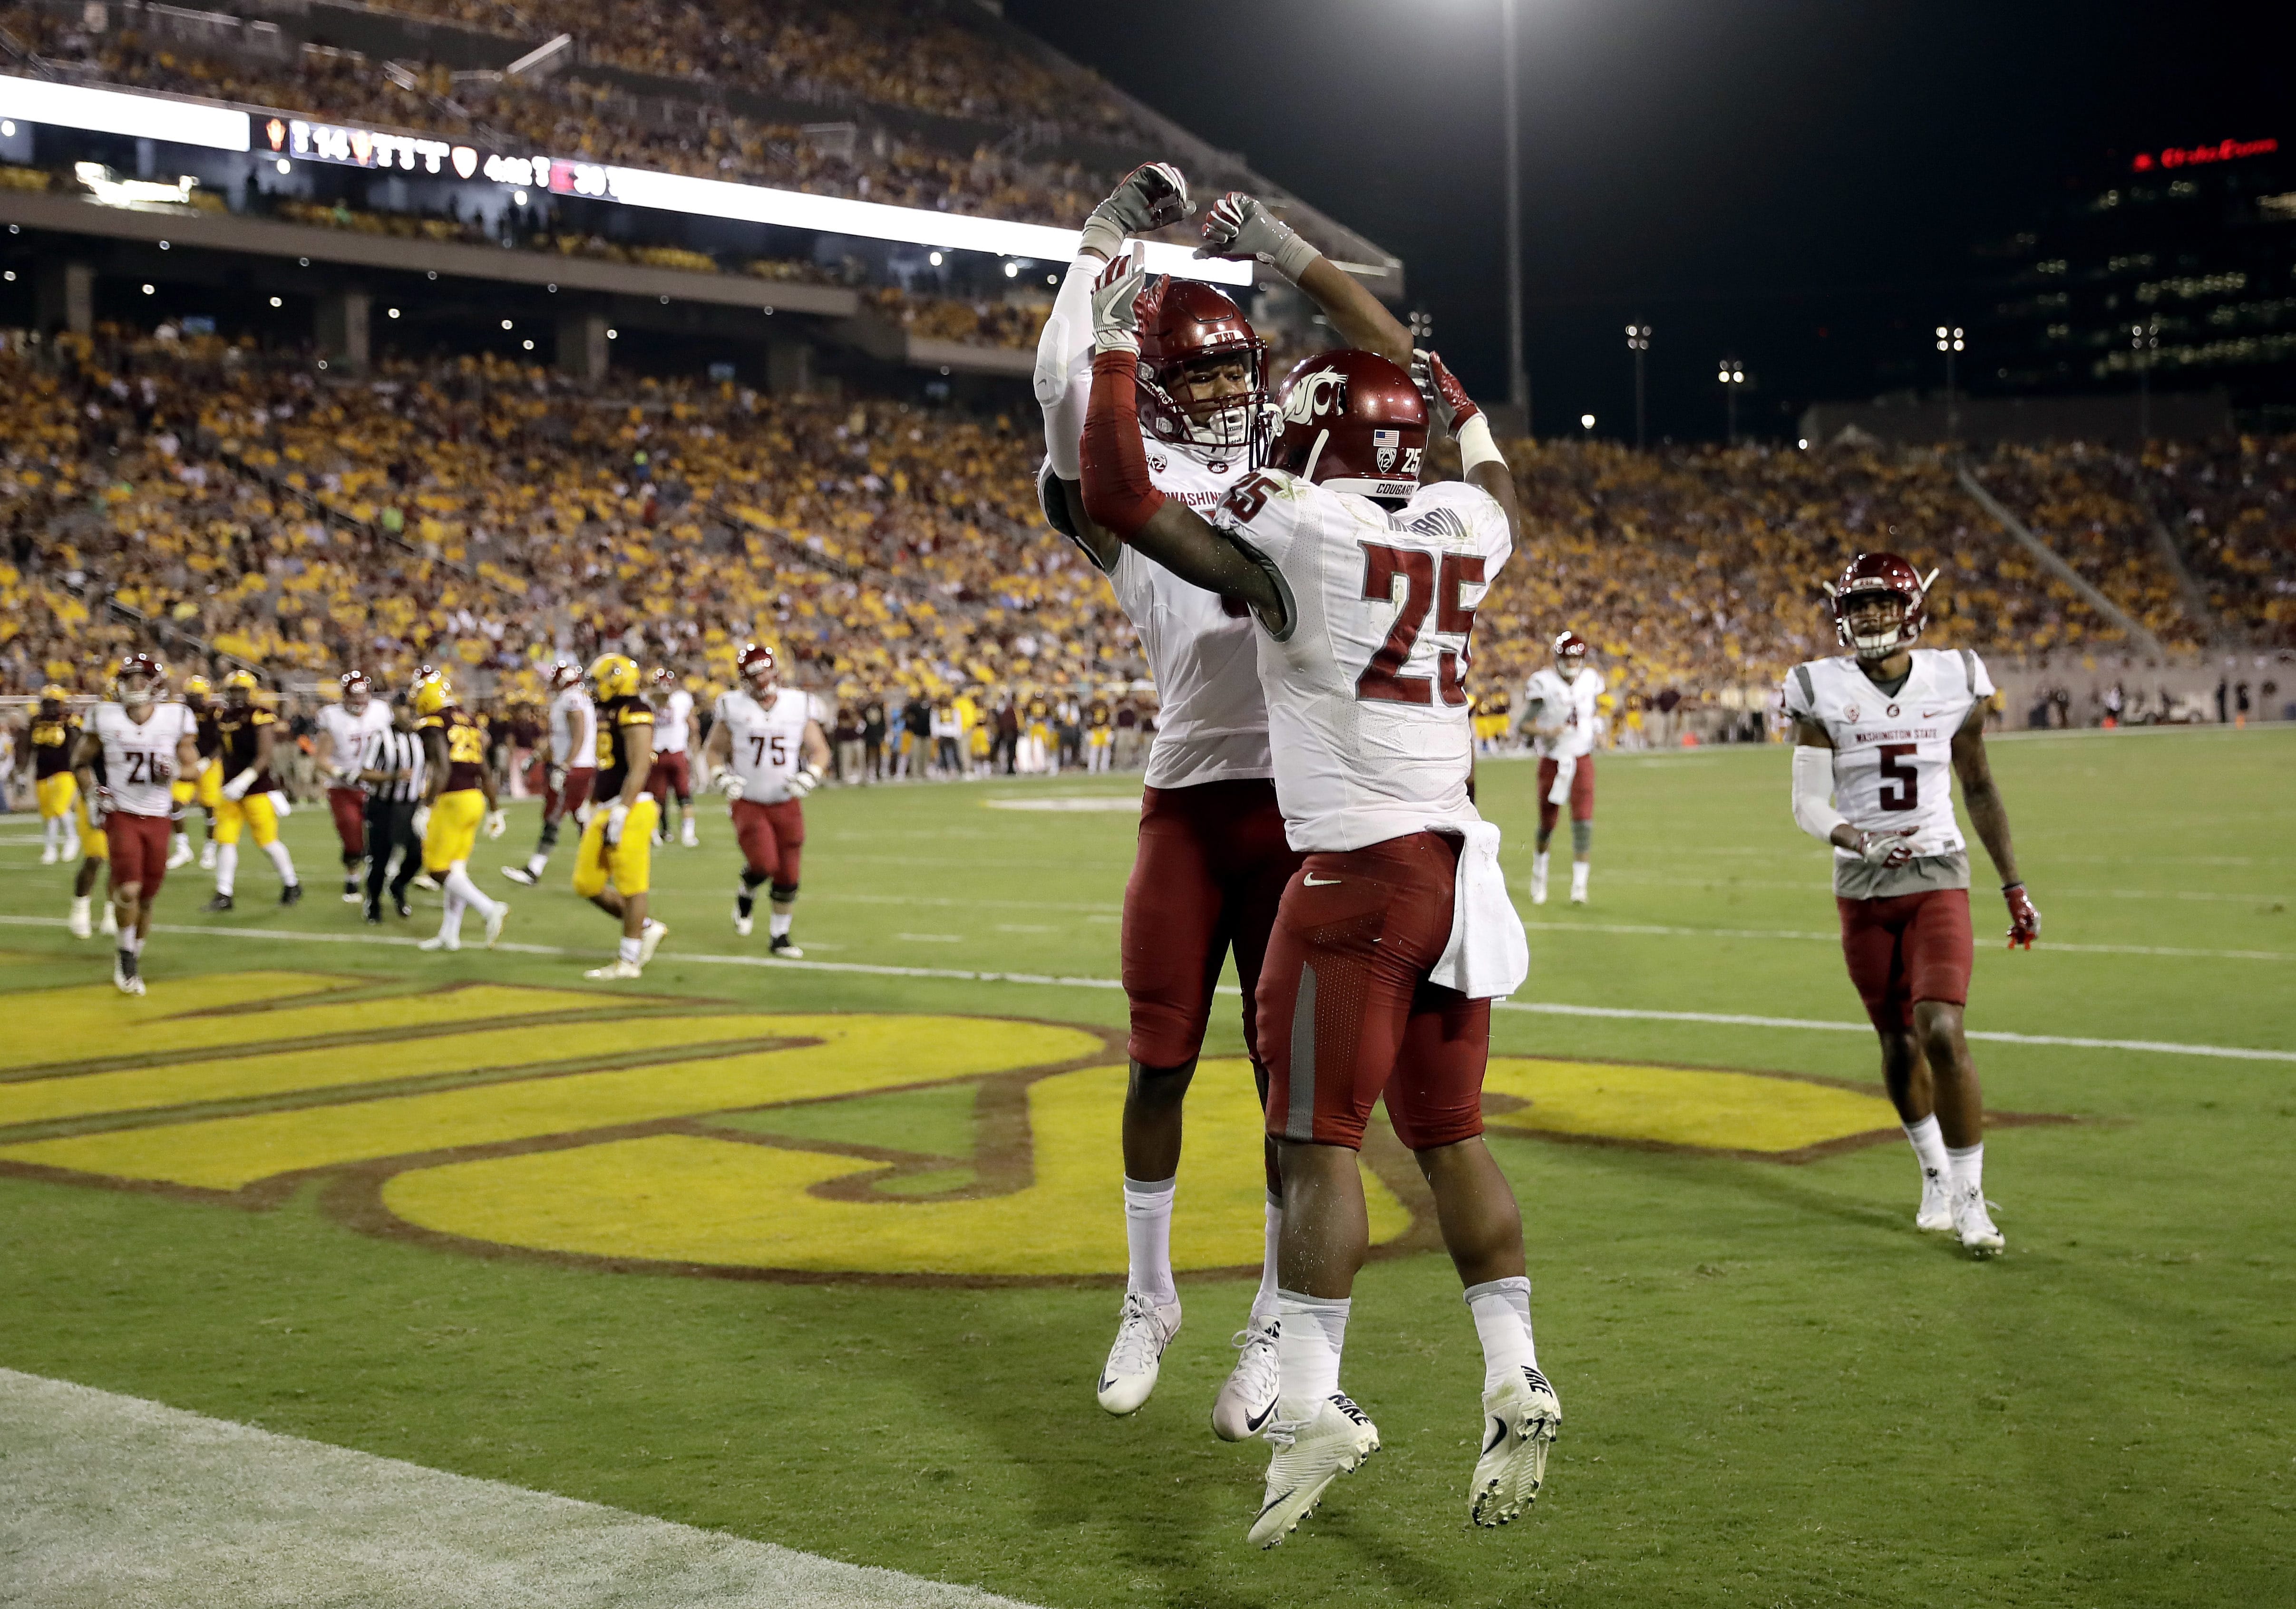 Washington State running back Jamal Morrow (25) celebrates his touchdown catch with teammate Isaiah Johnson-Mack during the second half of an NCAA college football game against Arizona State, Saturday, Oct. 22, 2016, in Tempe, Ariz.